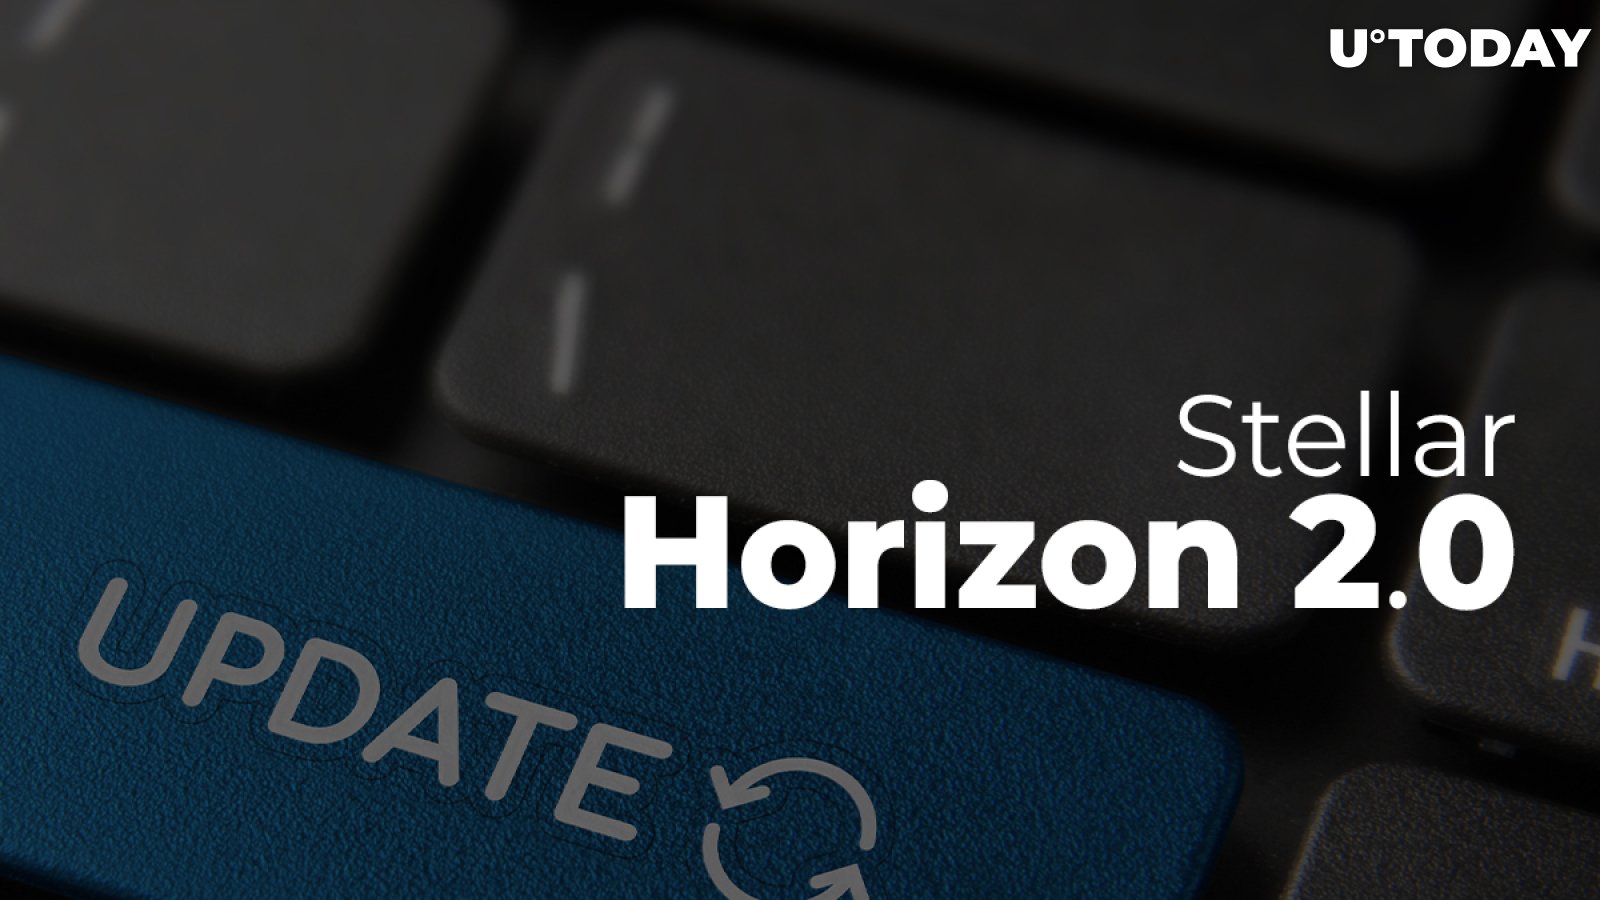 Stellar (XLM) Introduces Update Horizon 2.0. Why Is It Crucial for Stellar?